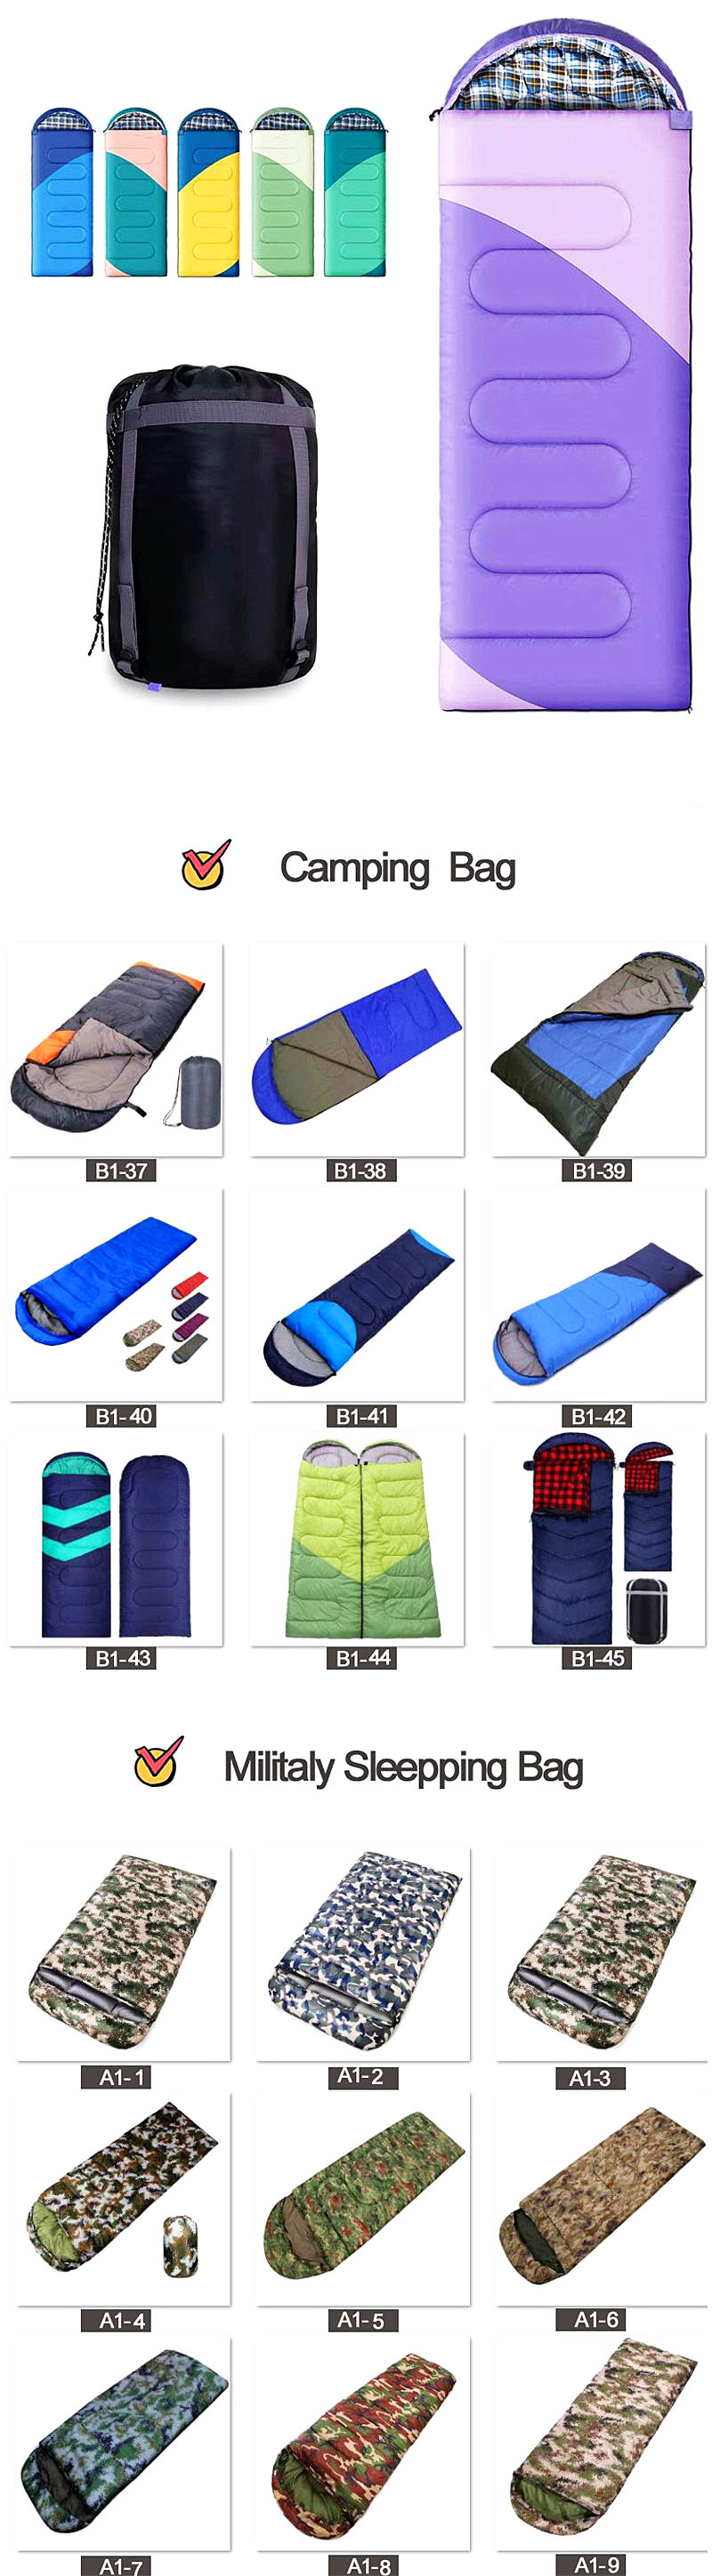 Adults Waterproof Mummy Shaped Sleeping Bags For Outdoor Survival